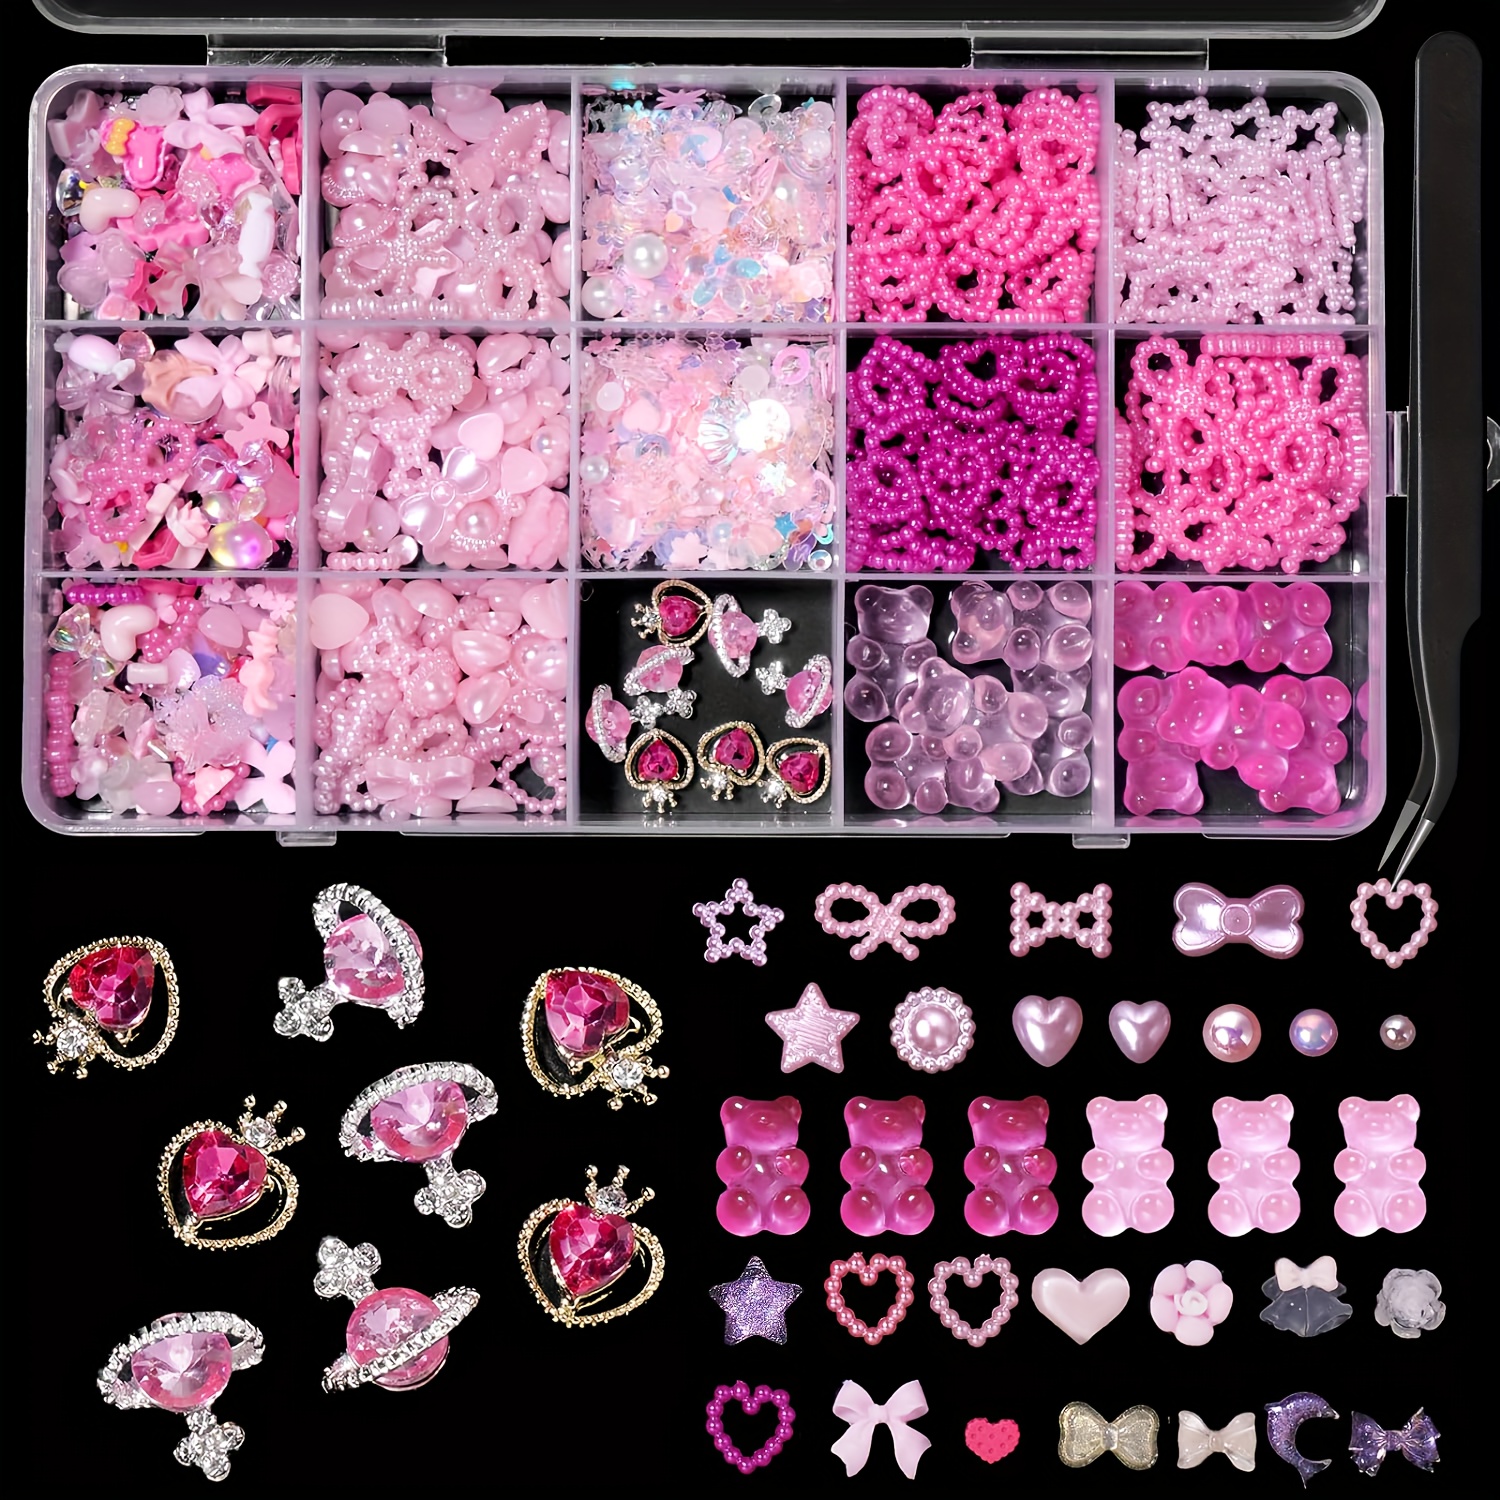 

Pink Pearls & Charms Nail Art Set, 3d Heart & Butterfly Bows, Bear & Star Jewel Nail Art Decoration, Planet Nail Gems, Assorted Diy Manicure Craft Beads Accessories